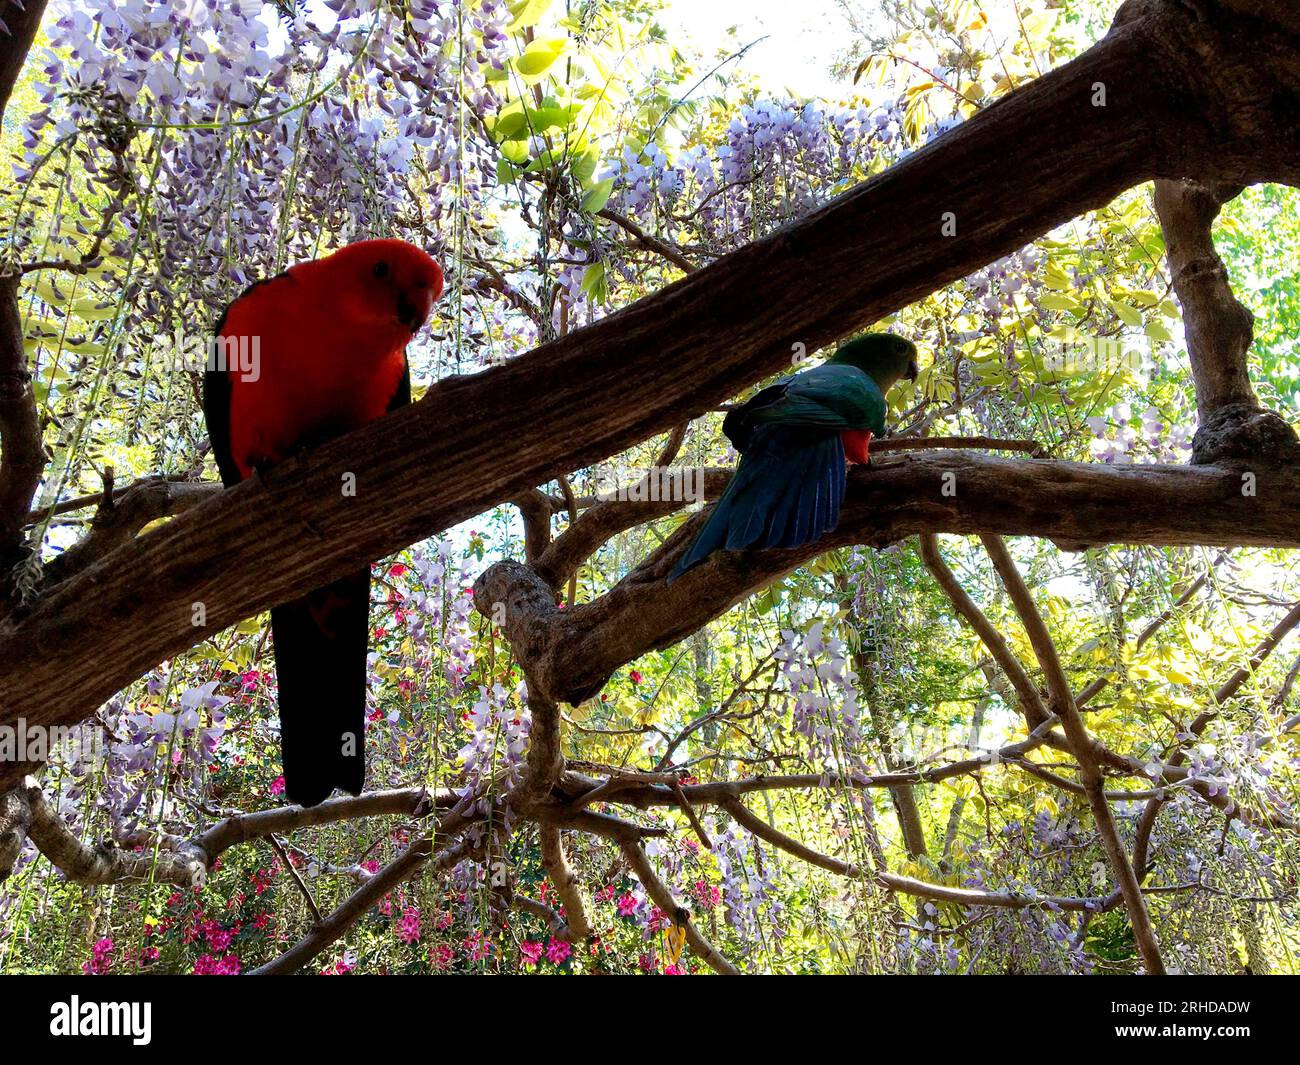 Male and female king parrots in a wisteria vine, Blue Mountains of NSW, Australia Stock Photo